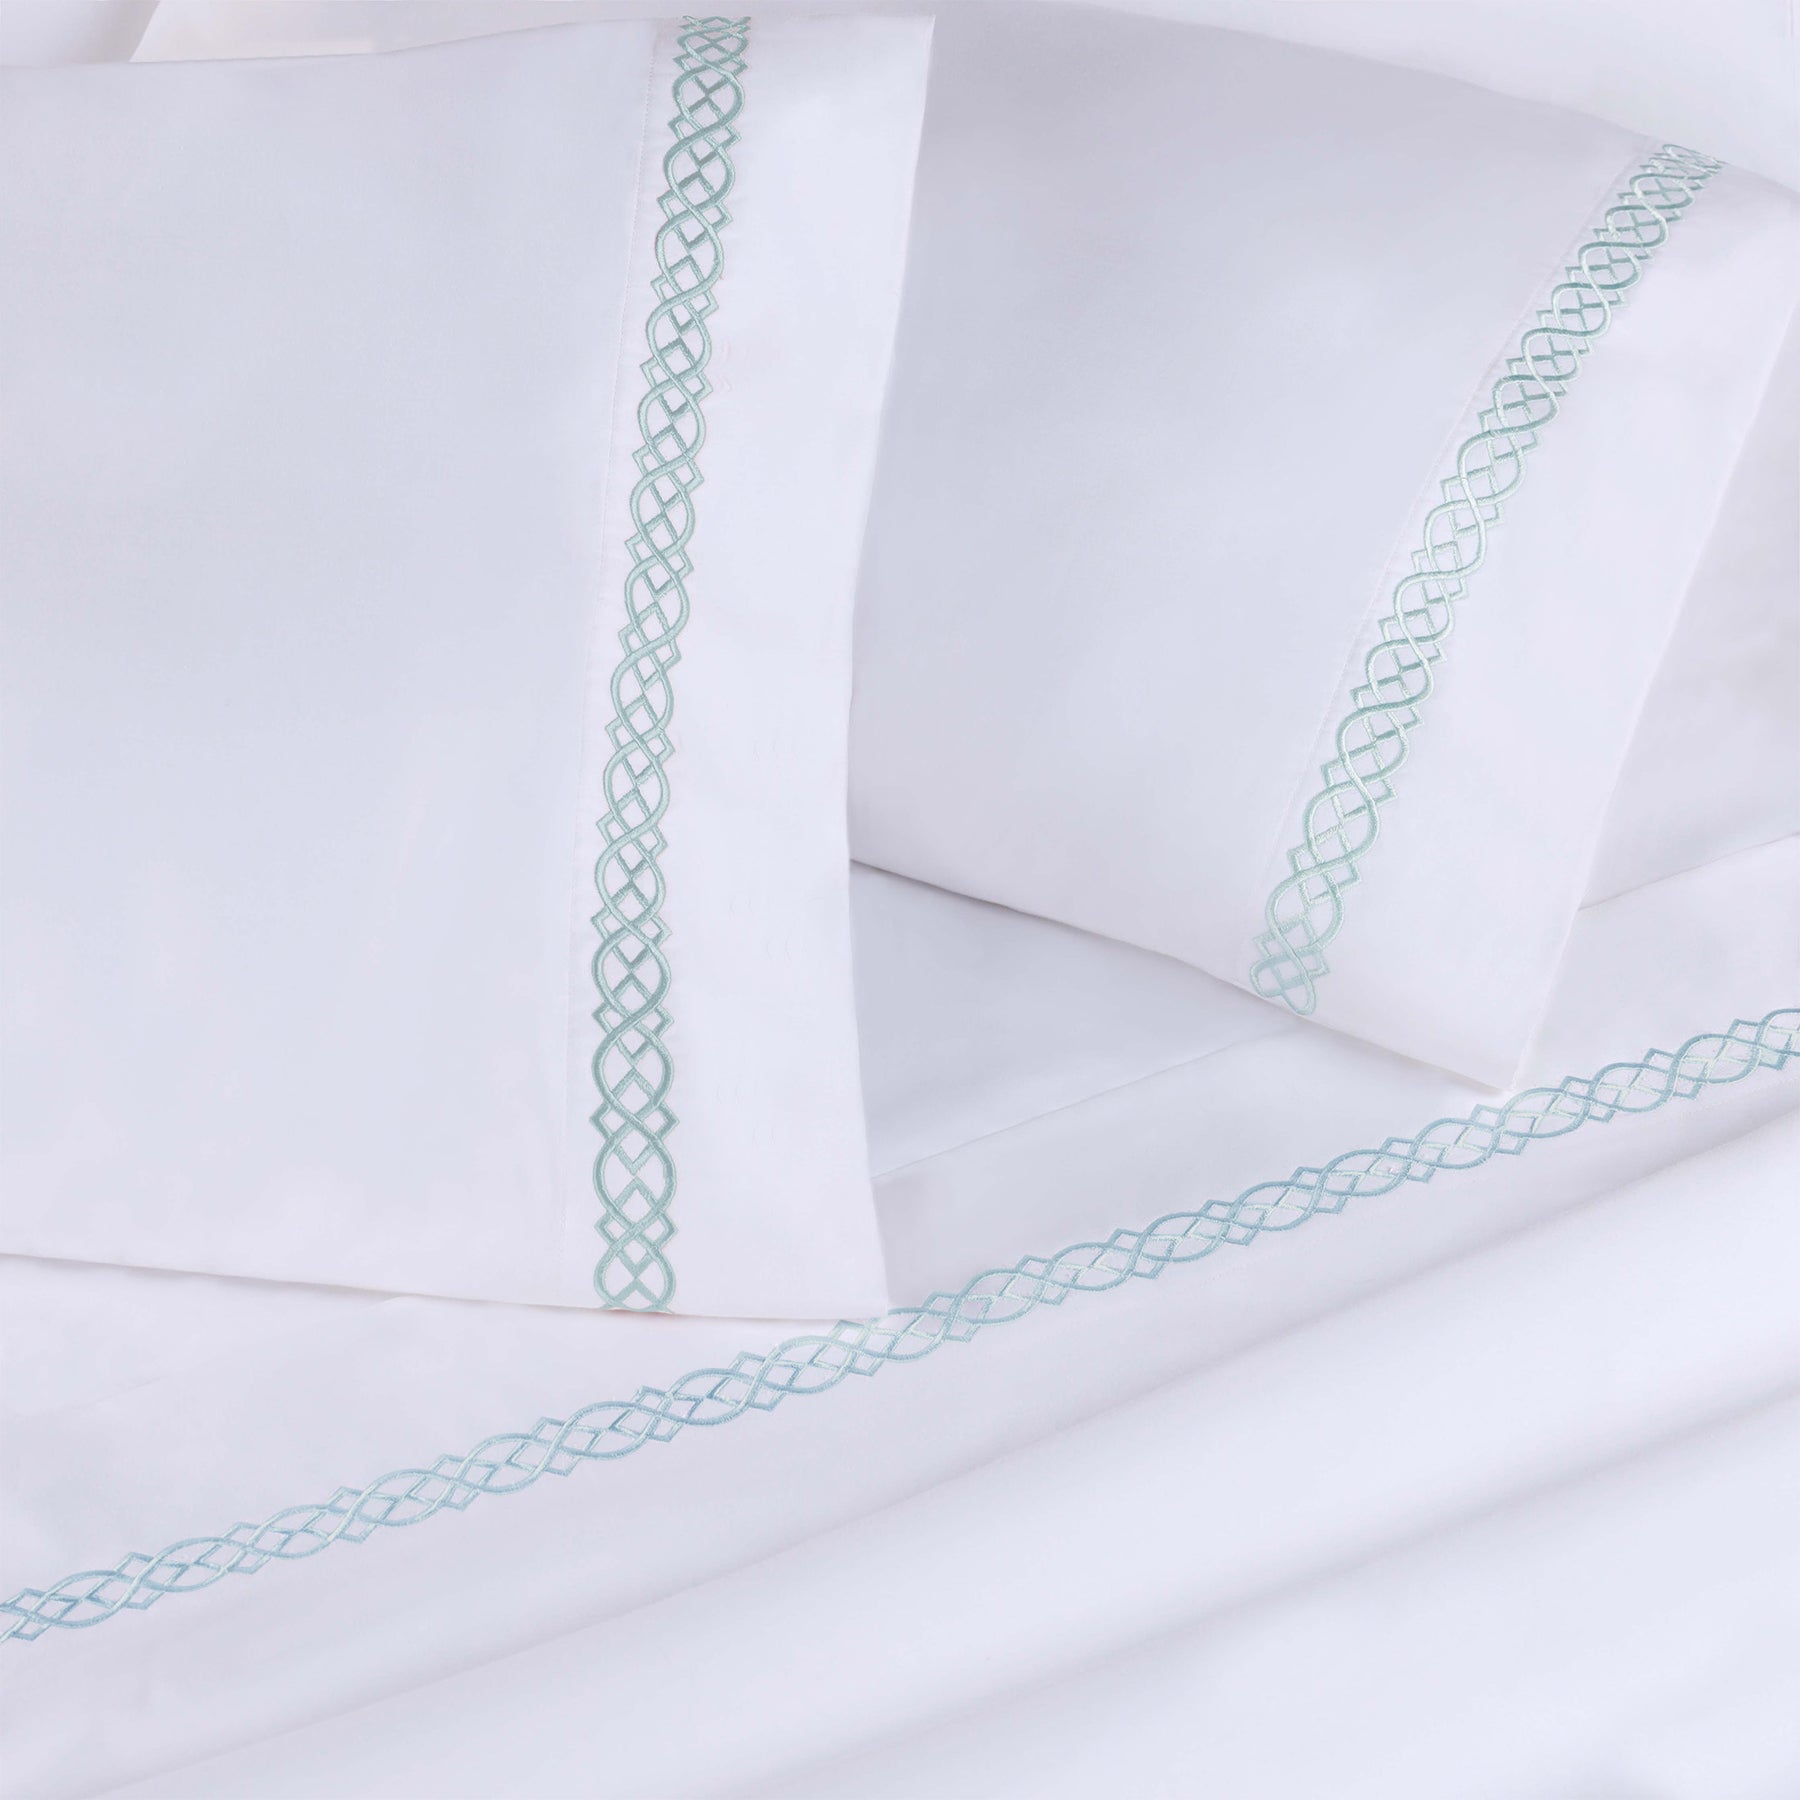 Egyptian Cotton 1000 Thread Count Embroidered Bed Sheet Set - White - Blue